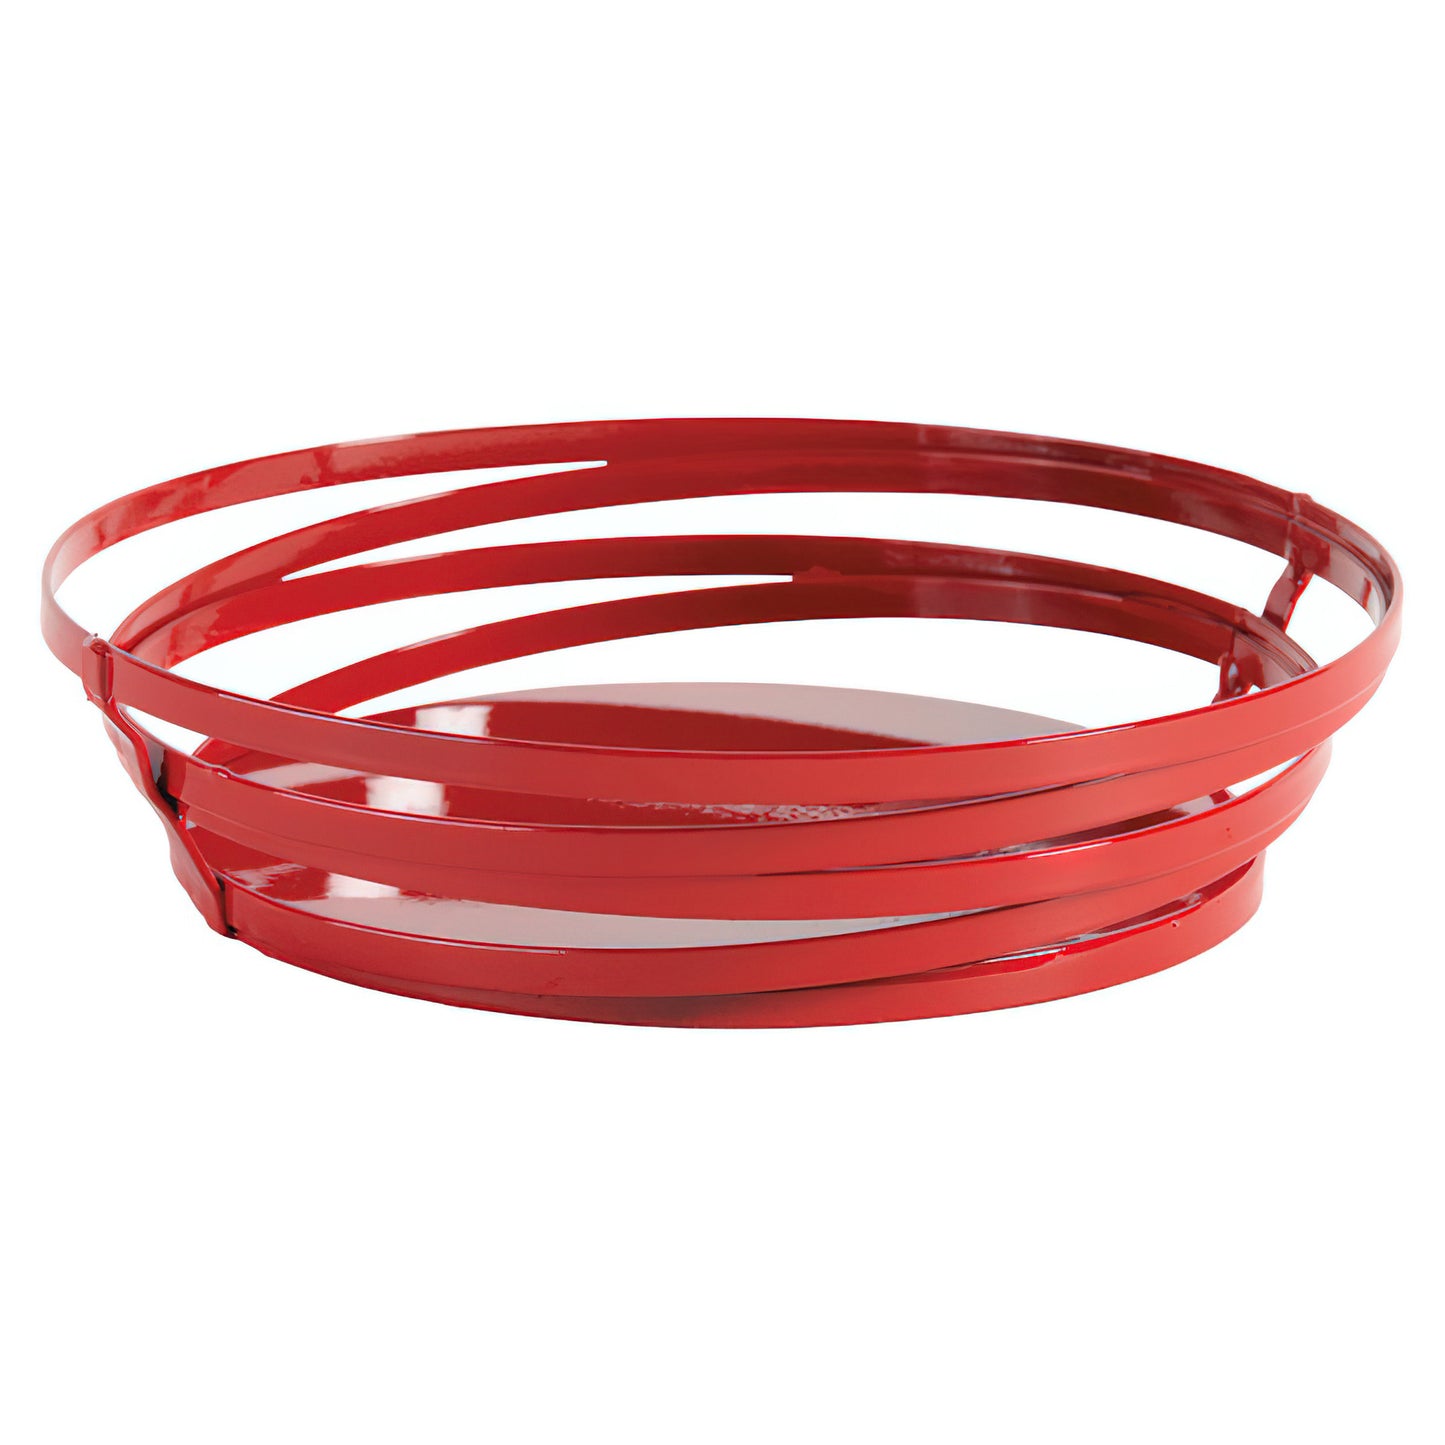 9" x 7" Oval Red Wire Food Serving Basket, Cyclone,  2.25" tall